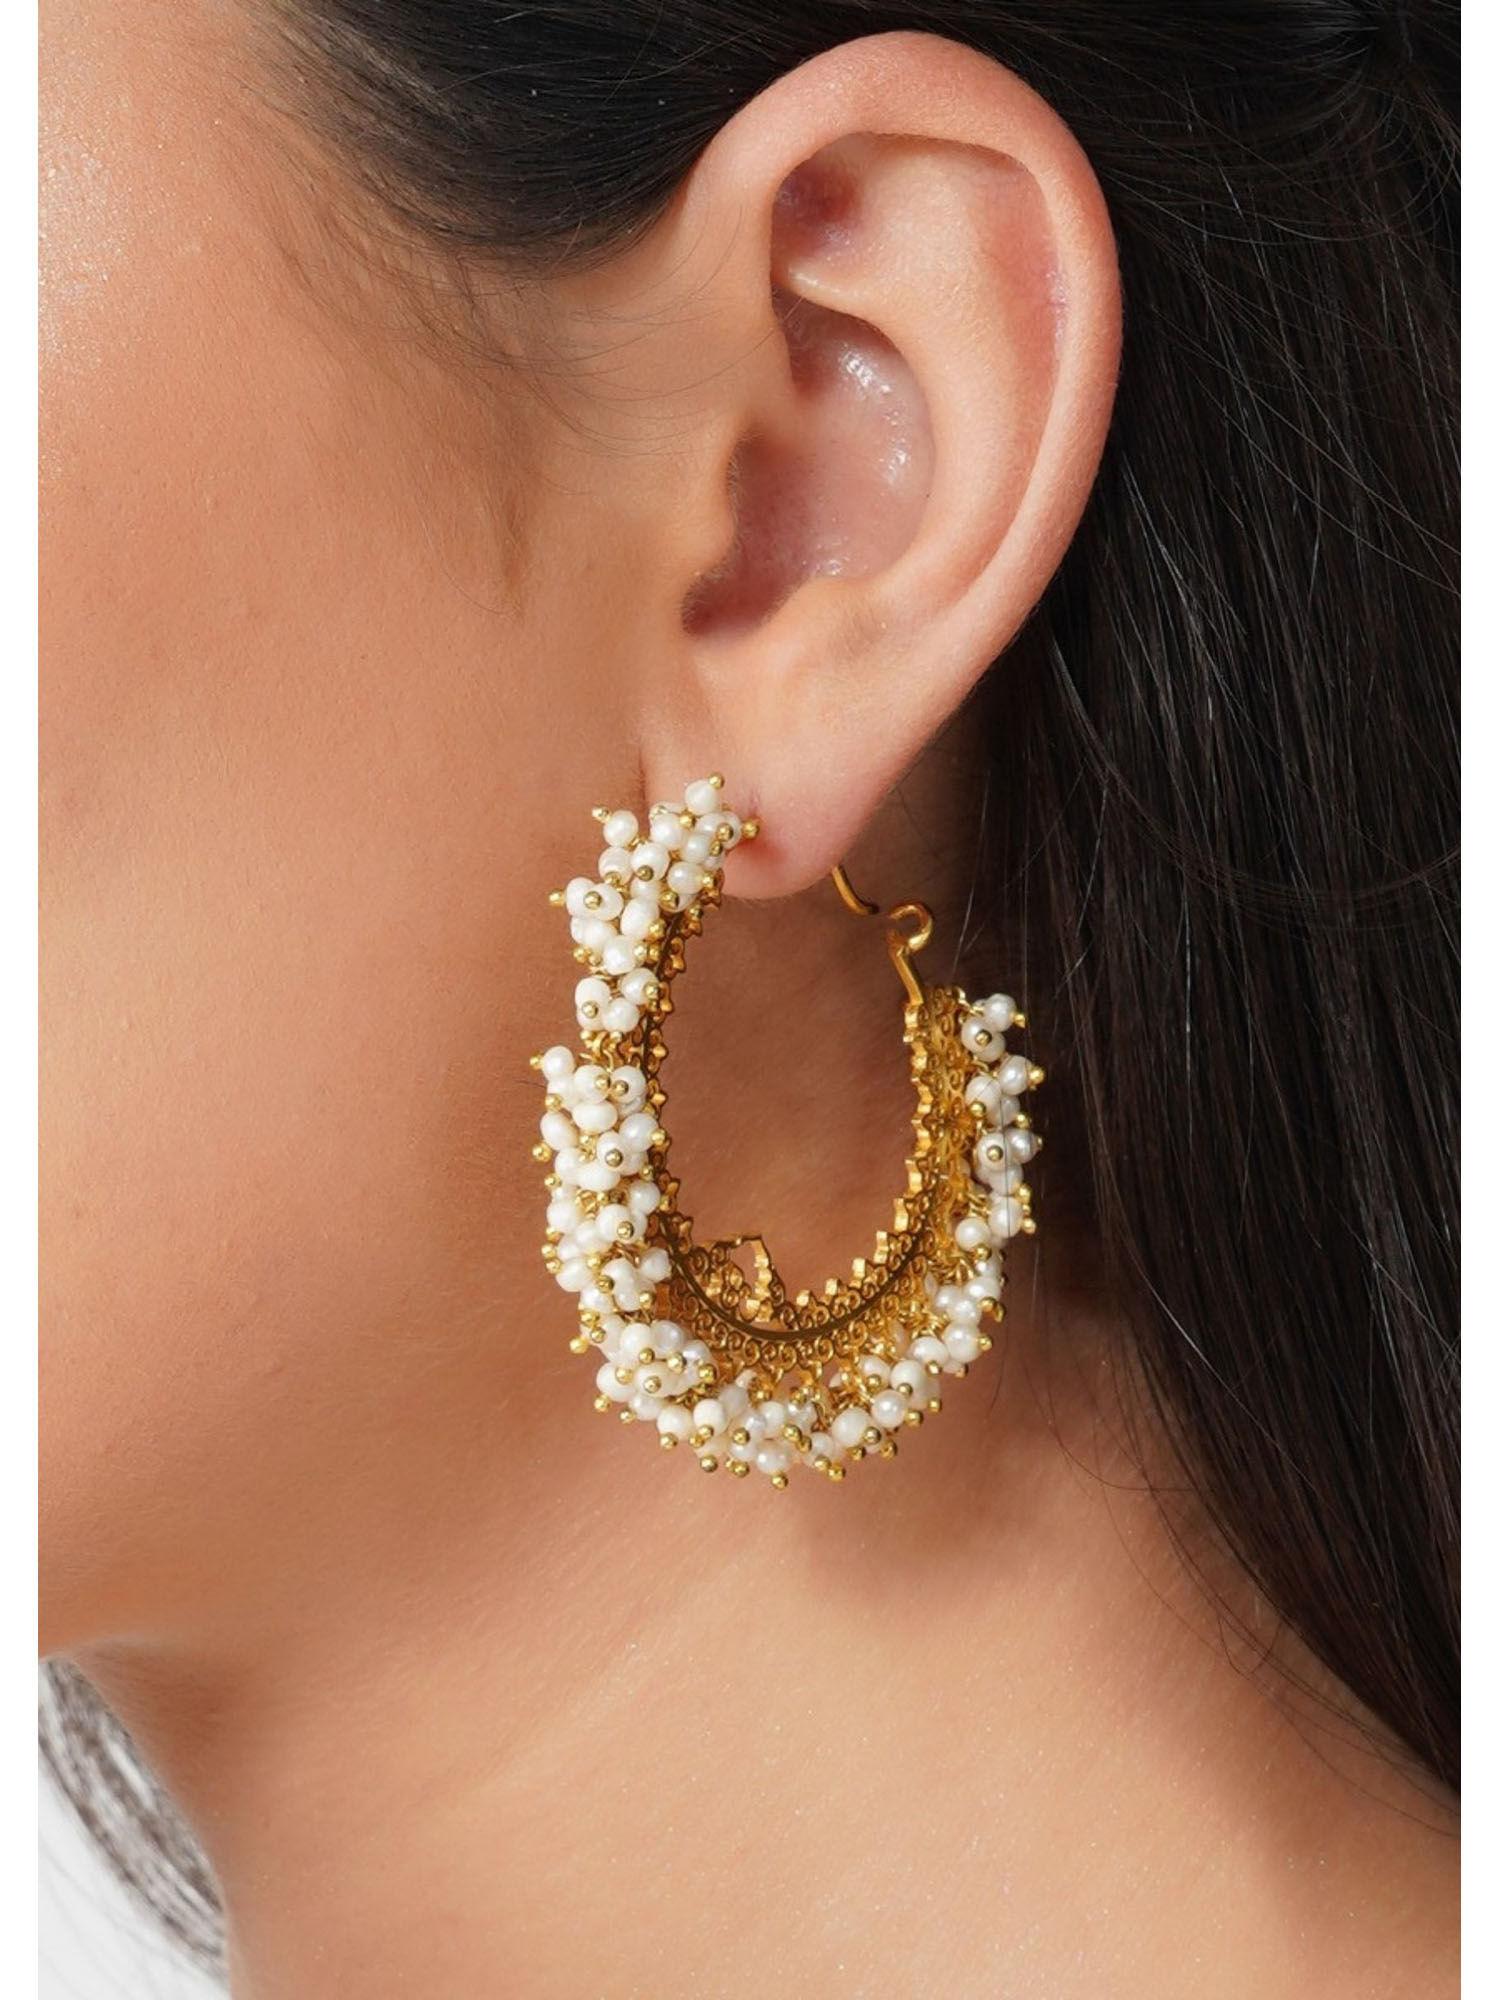 22kt gold plated handcrafted with natural freshwater white pearls wedding danglers earrings